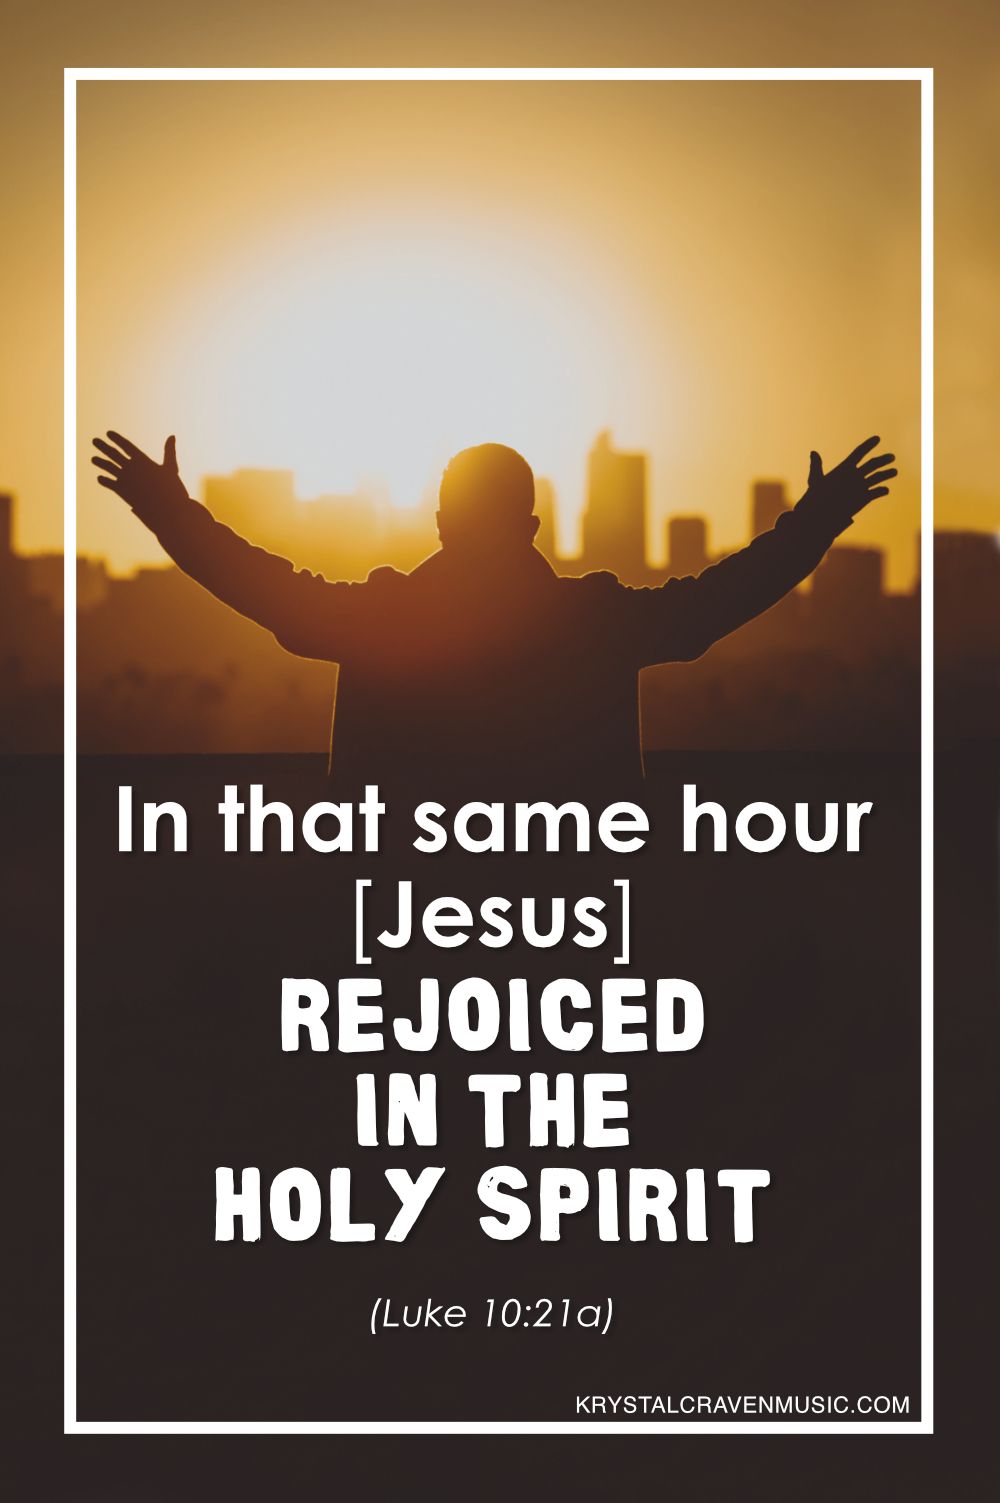 The text from Luke 10:21a "In that same hour [Jesus] rejoiced in the holy spirit" in a white font below the back of the silhouette of a man with his arms raised with a city skyline in the background with the sun just over the skyscrapers.